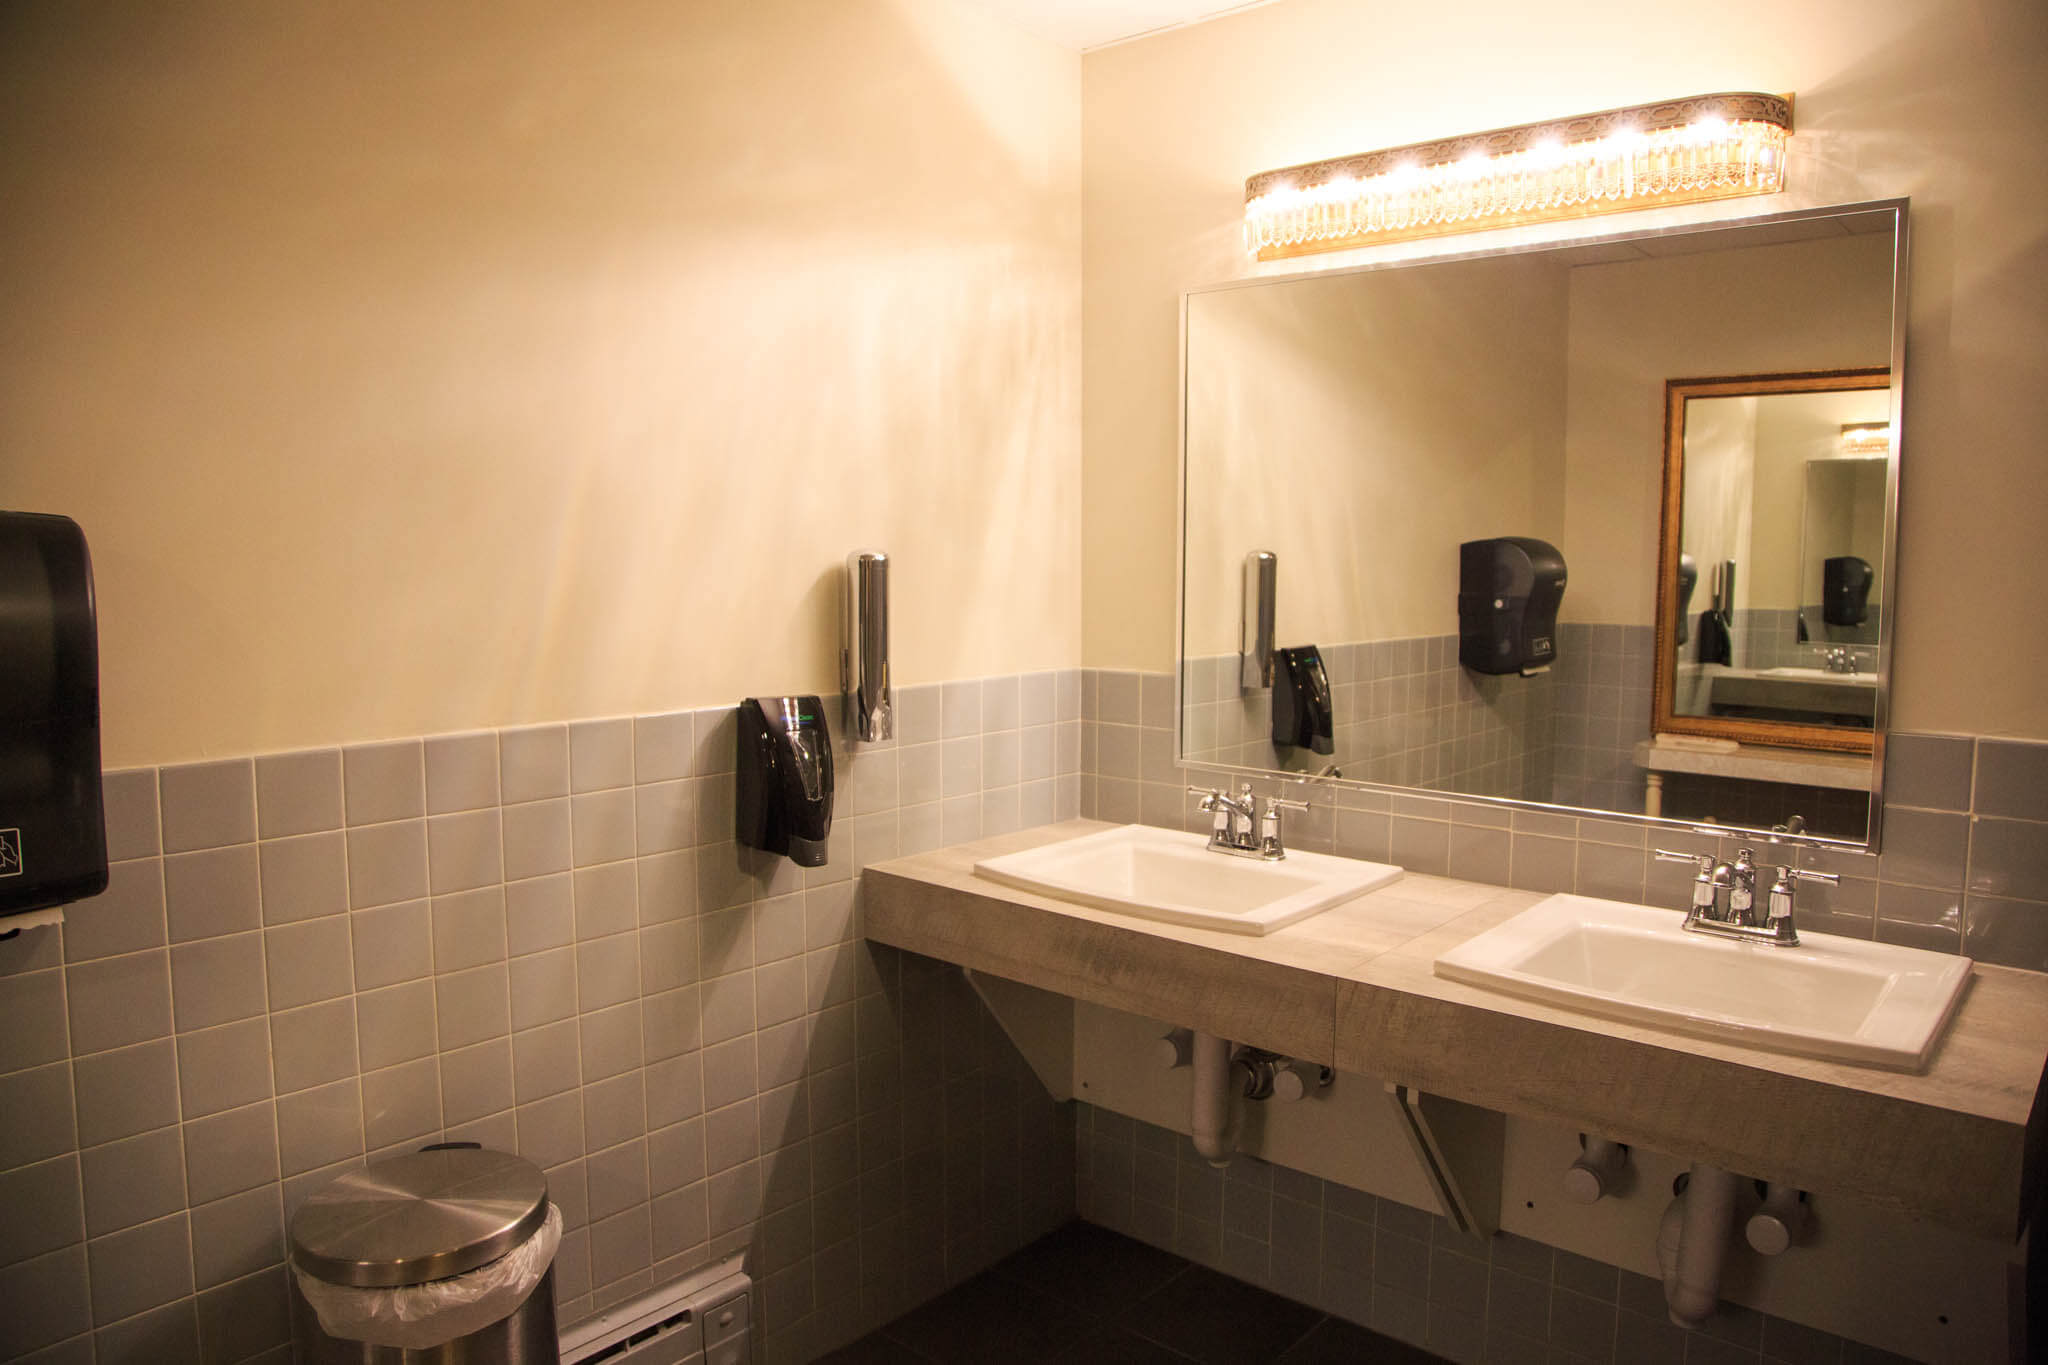 Sinks in the renovated washrooms allow easier access for users in wheelchairs